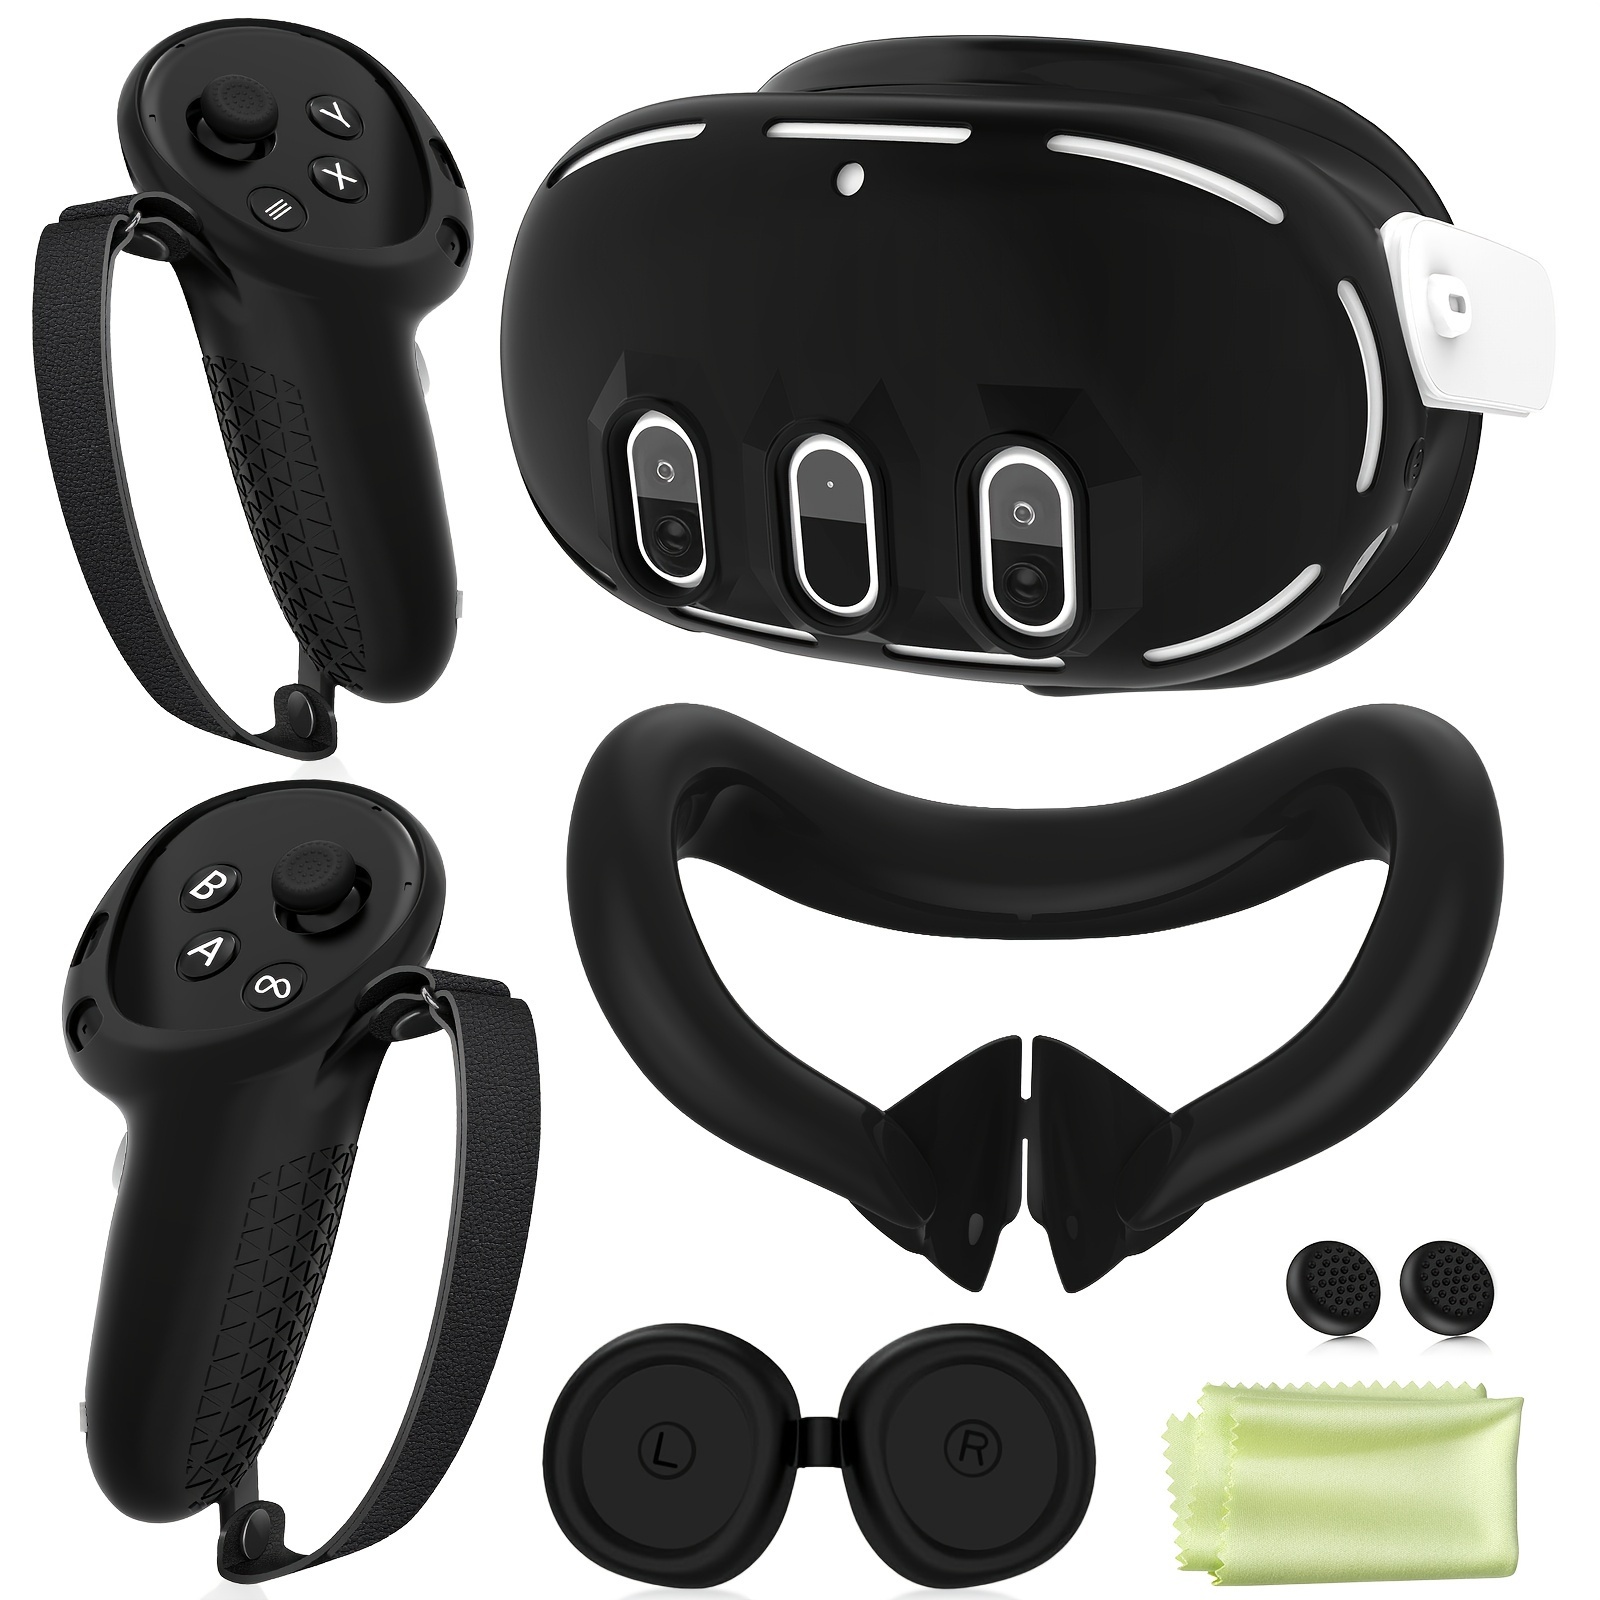 

Silicone Cover Set Compatible With Oculus/, Vr Accessories Protective Cover Includes Controller Grips, Front Shell Headset Cover And Face Cover